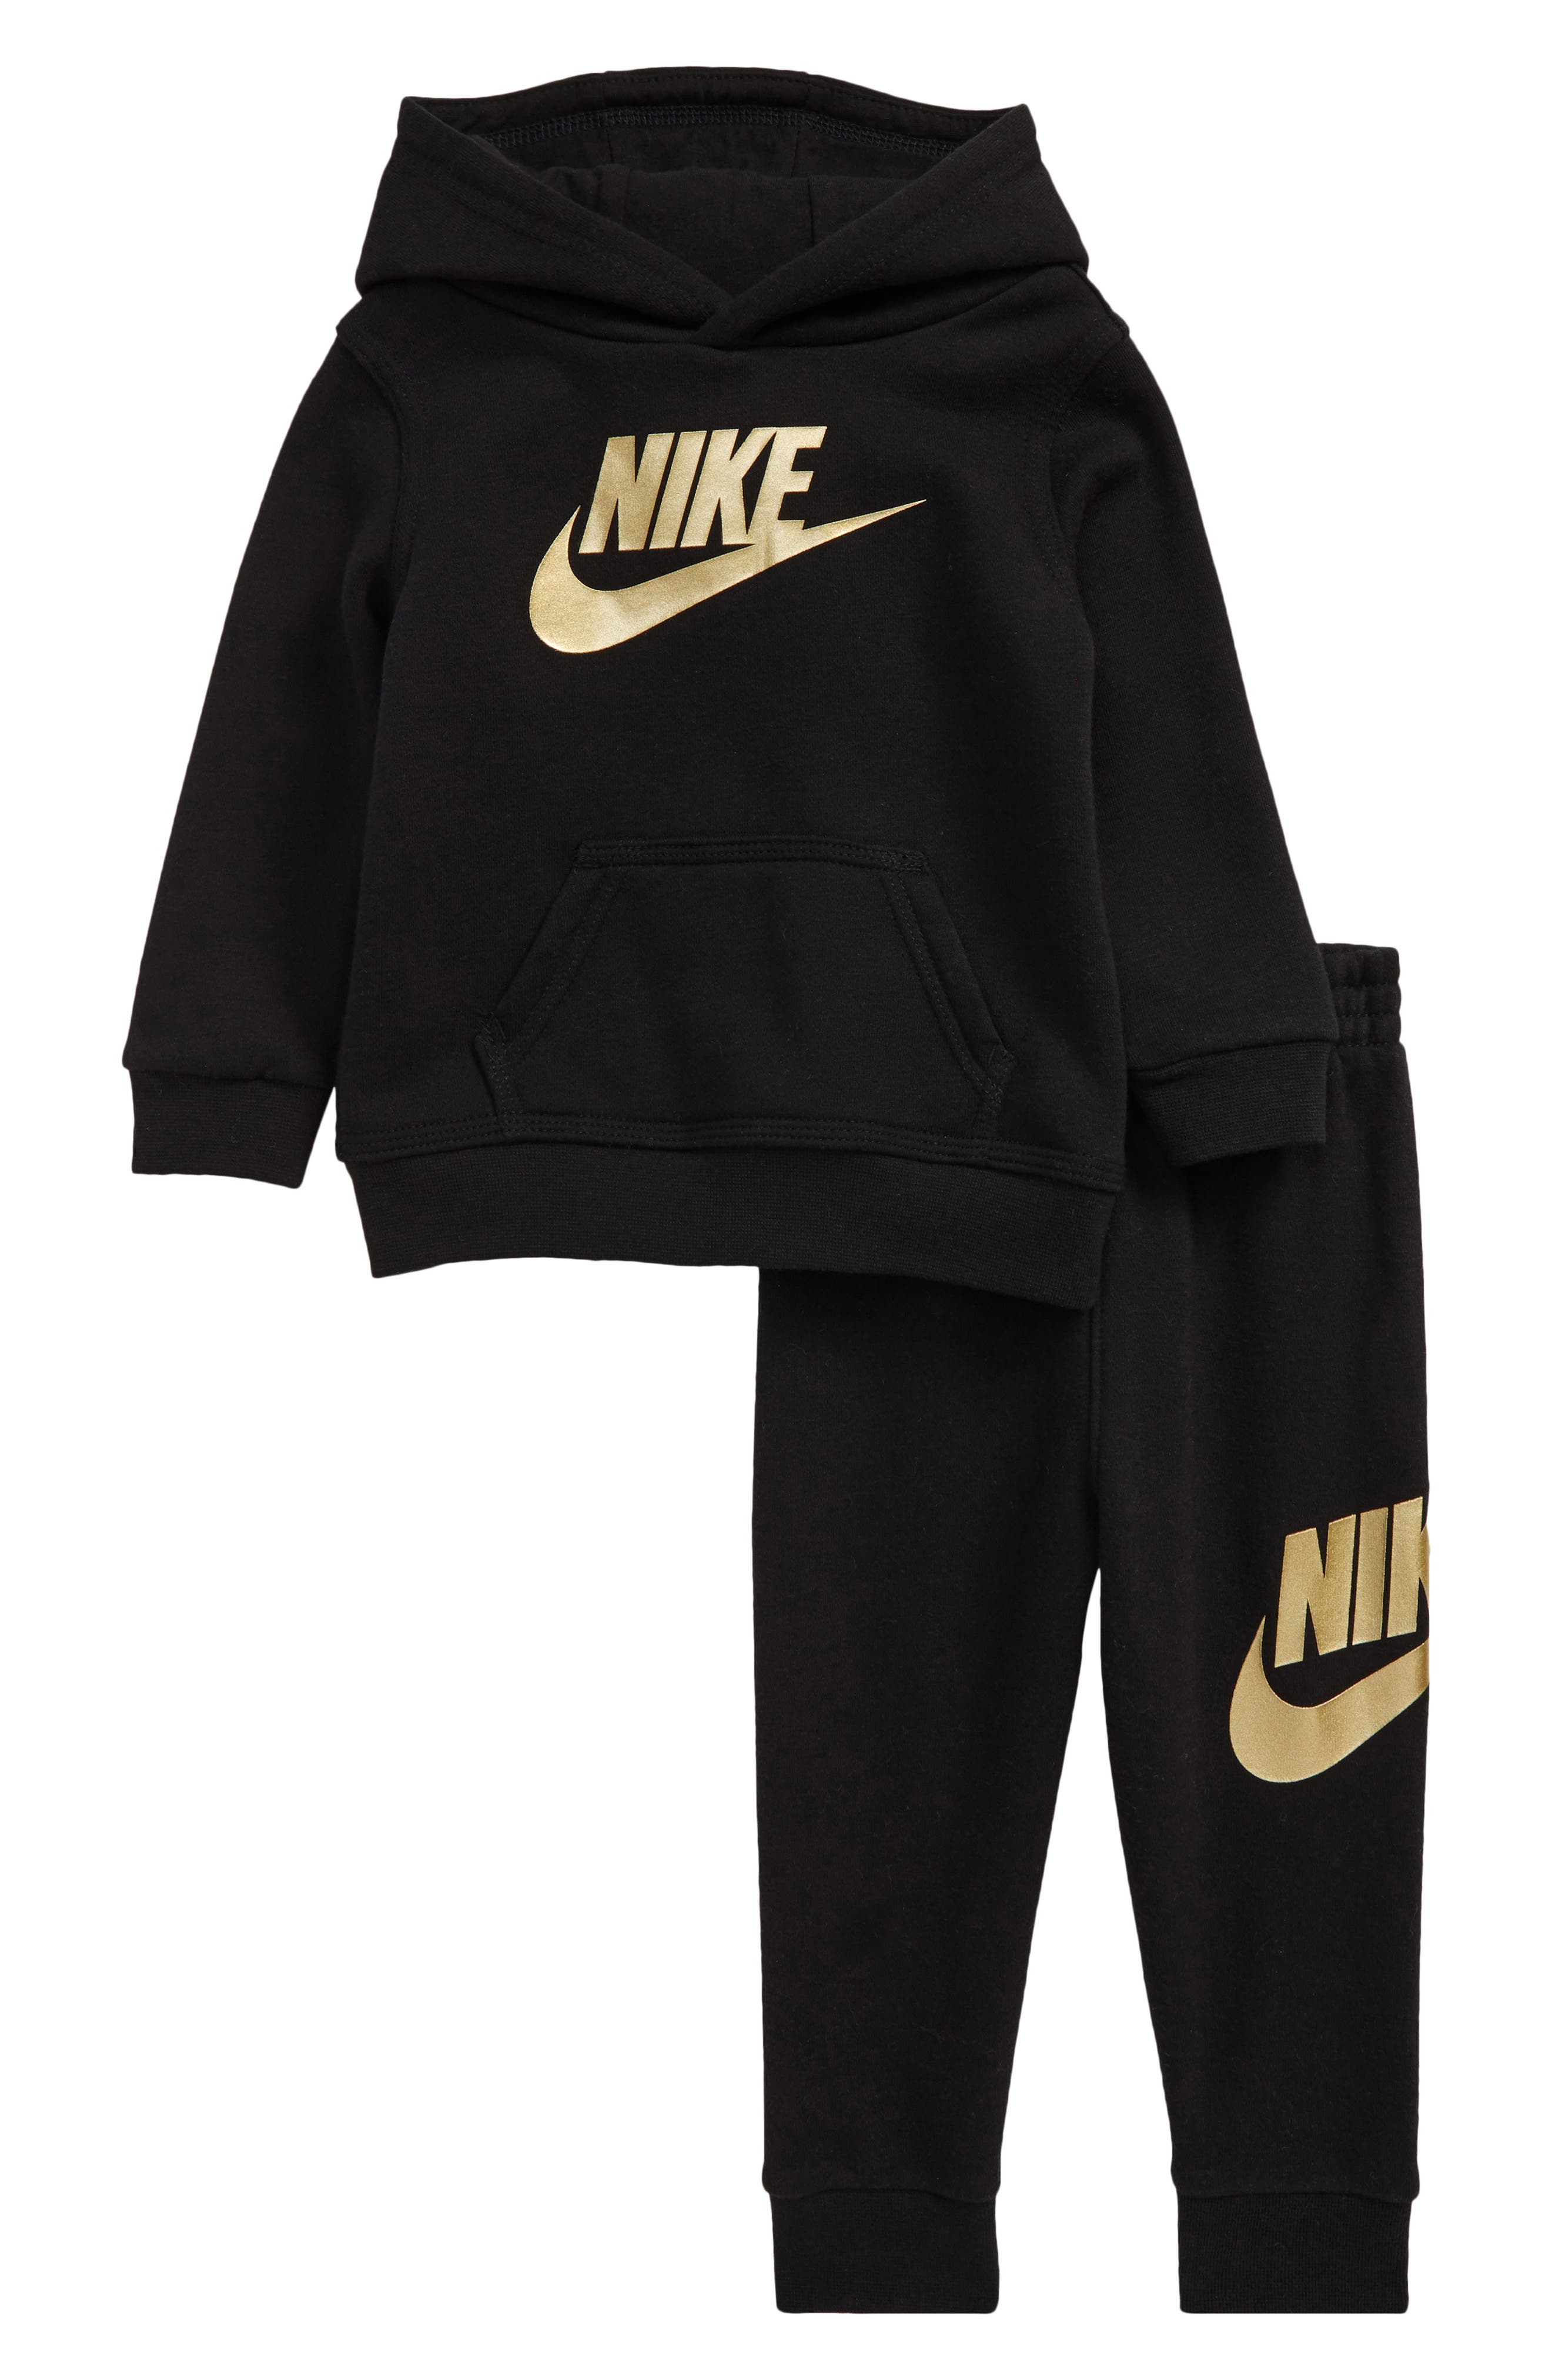 nike black and gold sweatsuit